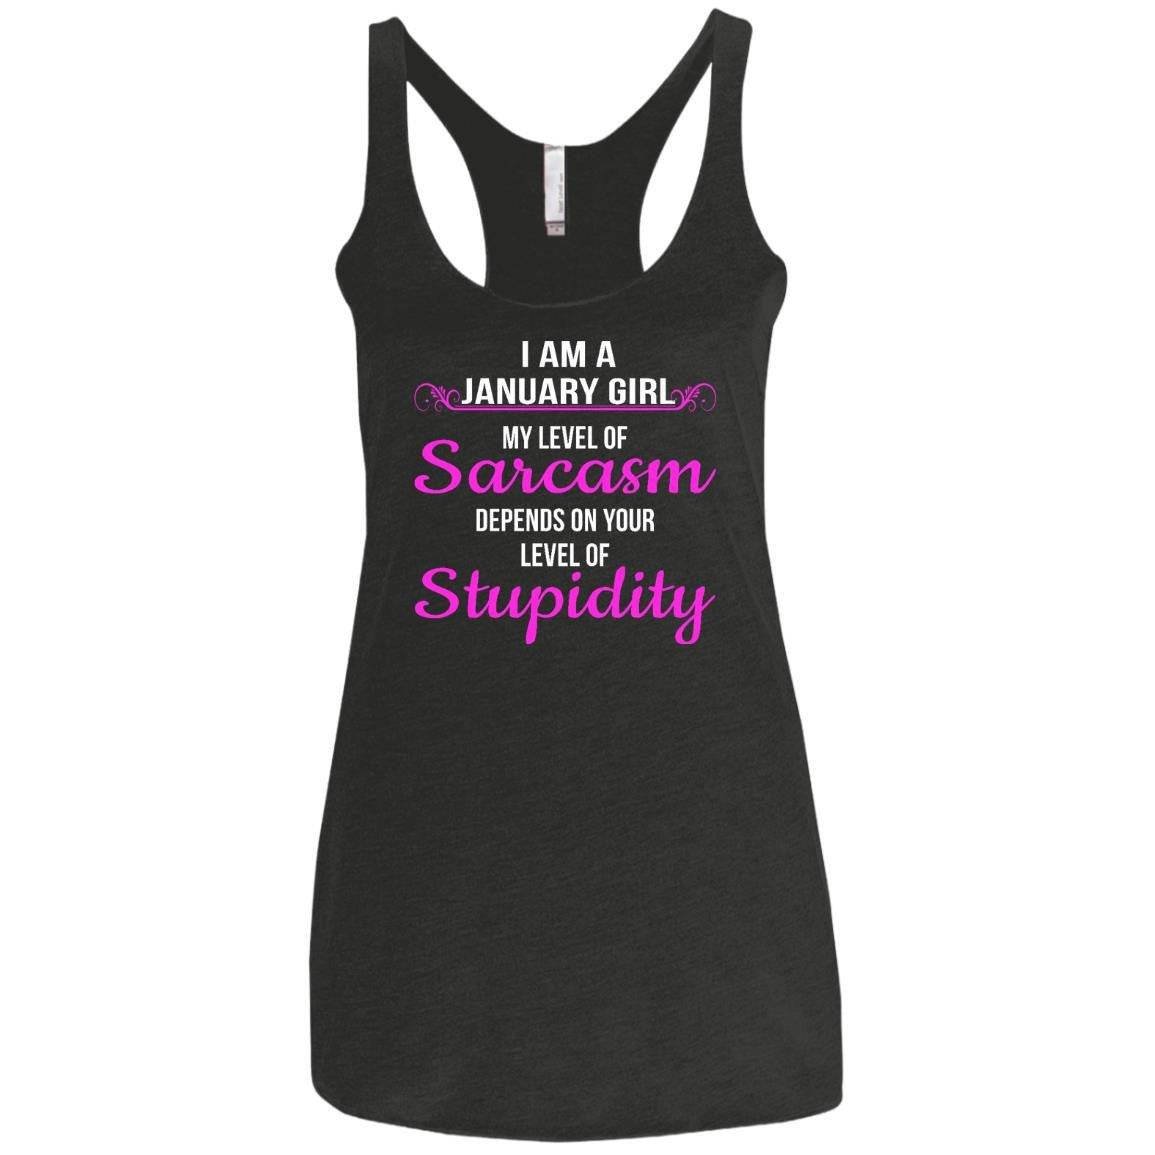 I am a January girl My level of sarcasm depends on your level of Stupidity shirt